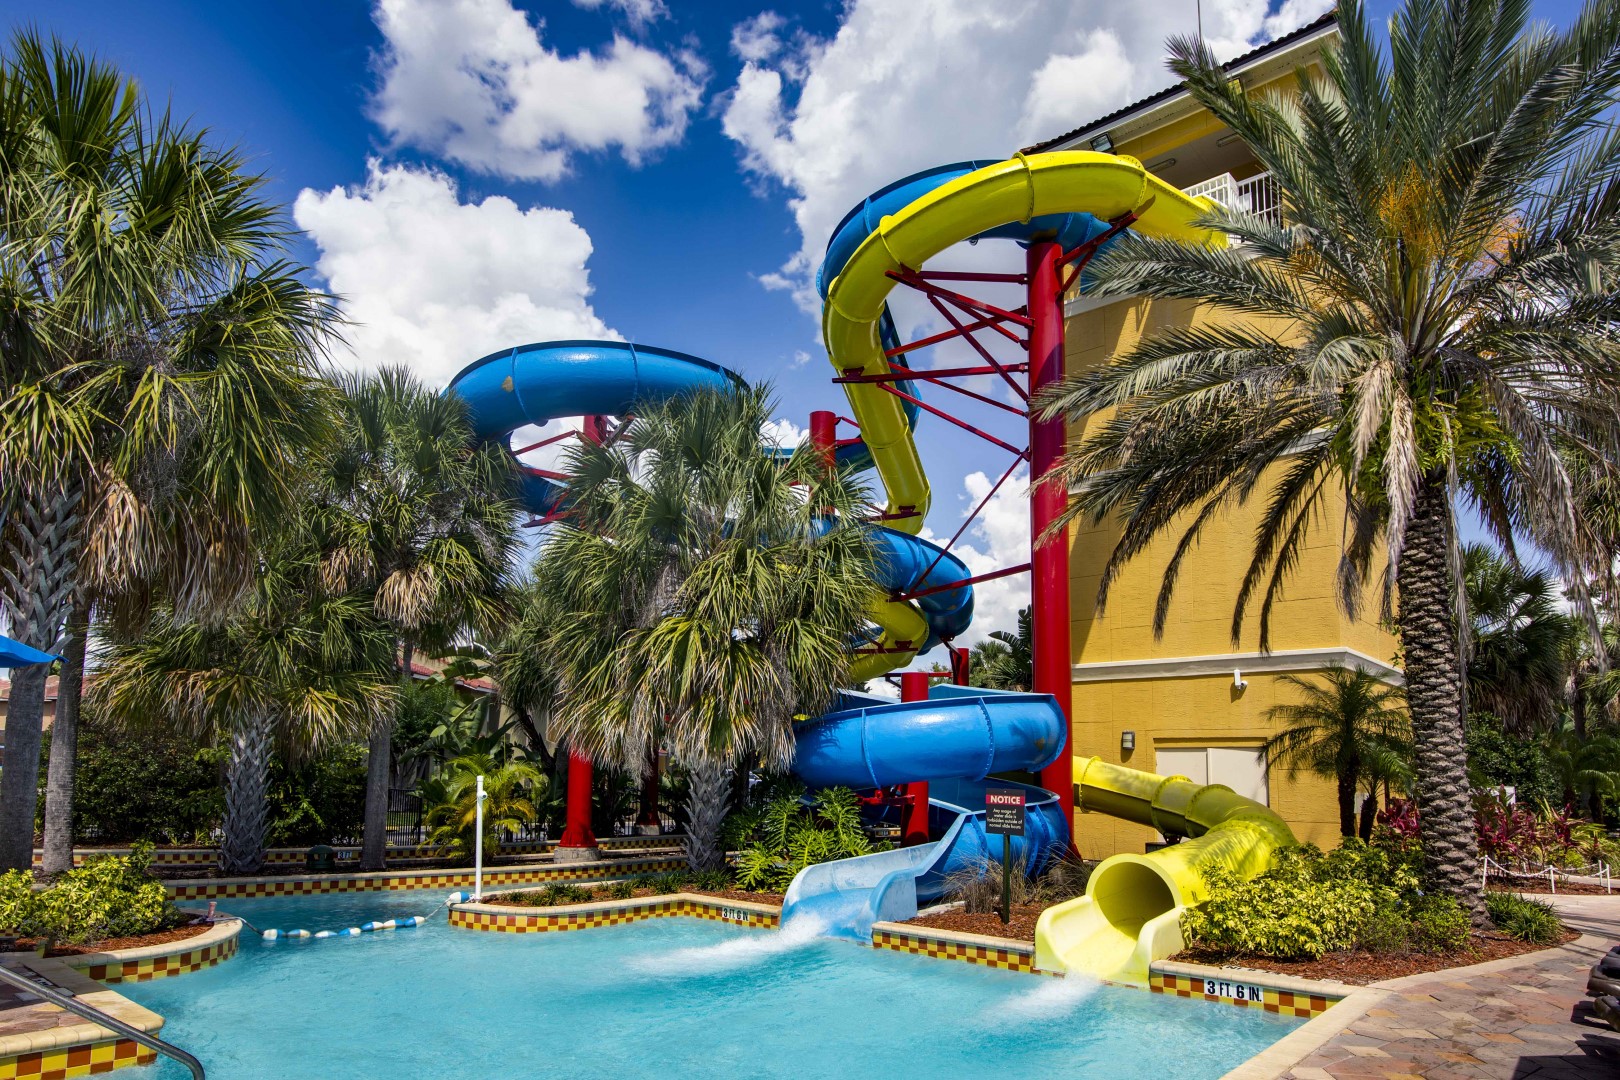 Pool and Water Park